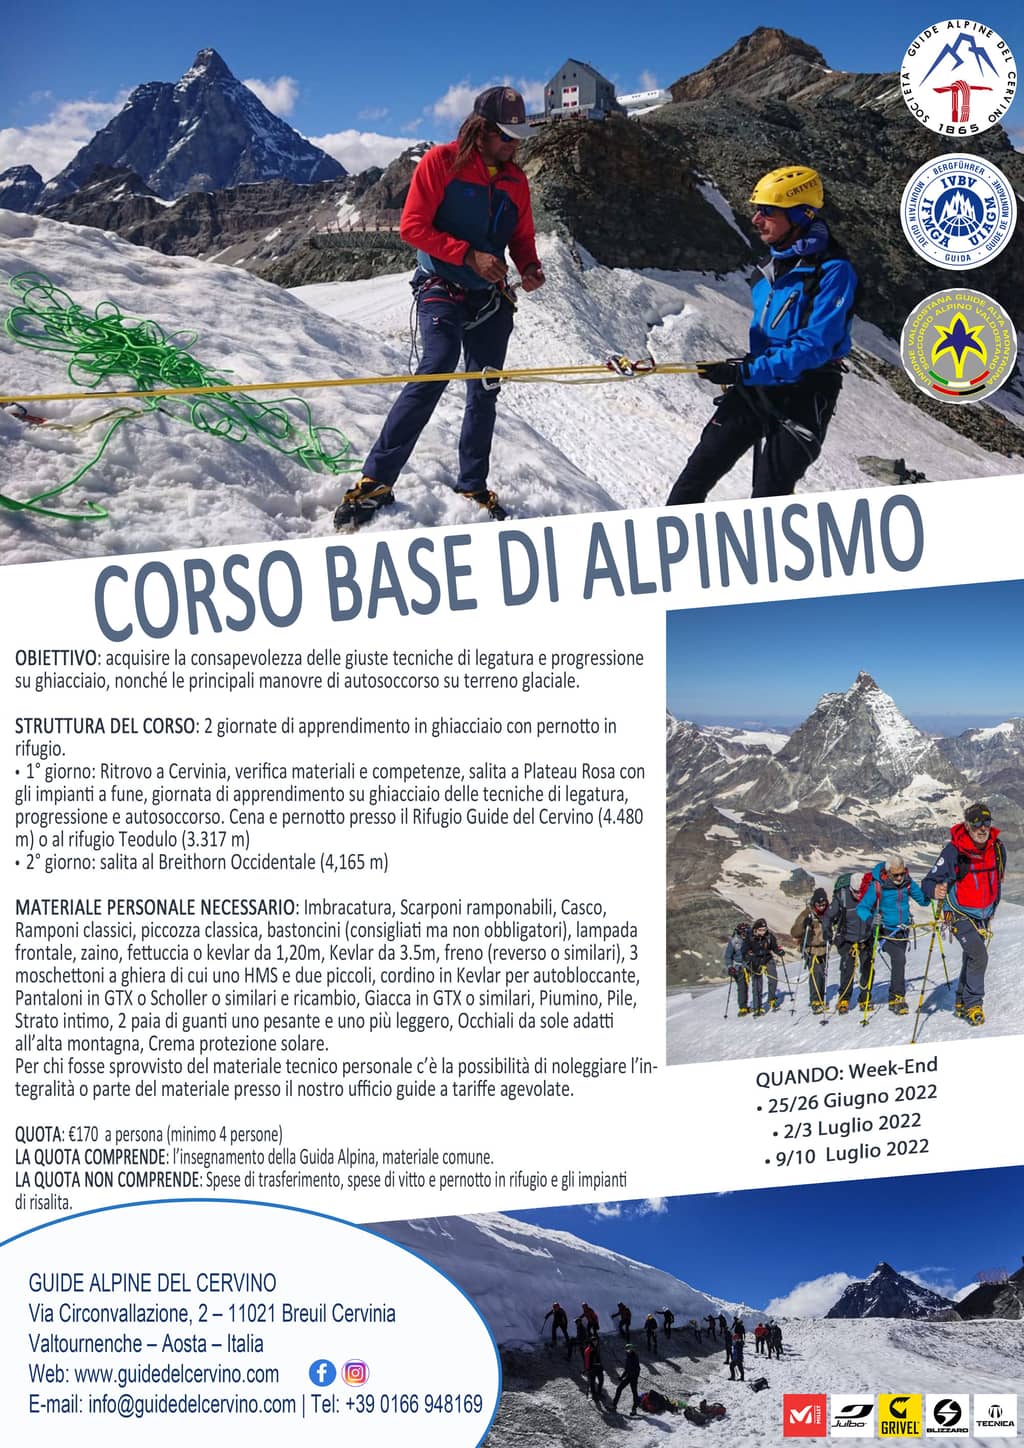 MOUNTAINEERING BASIC COURSE - Guide del Cervino